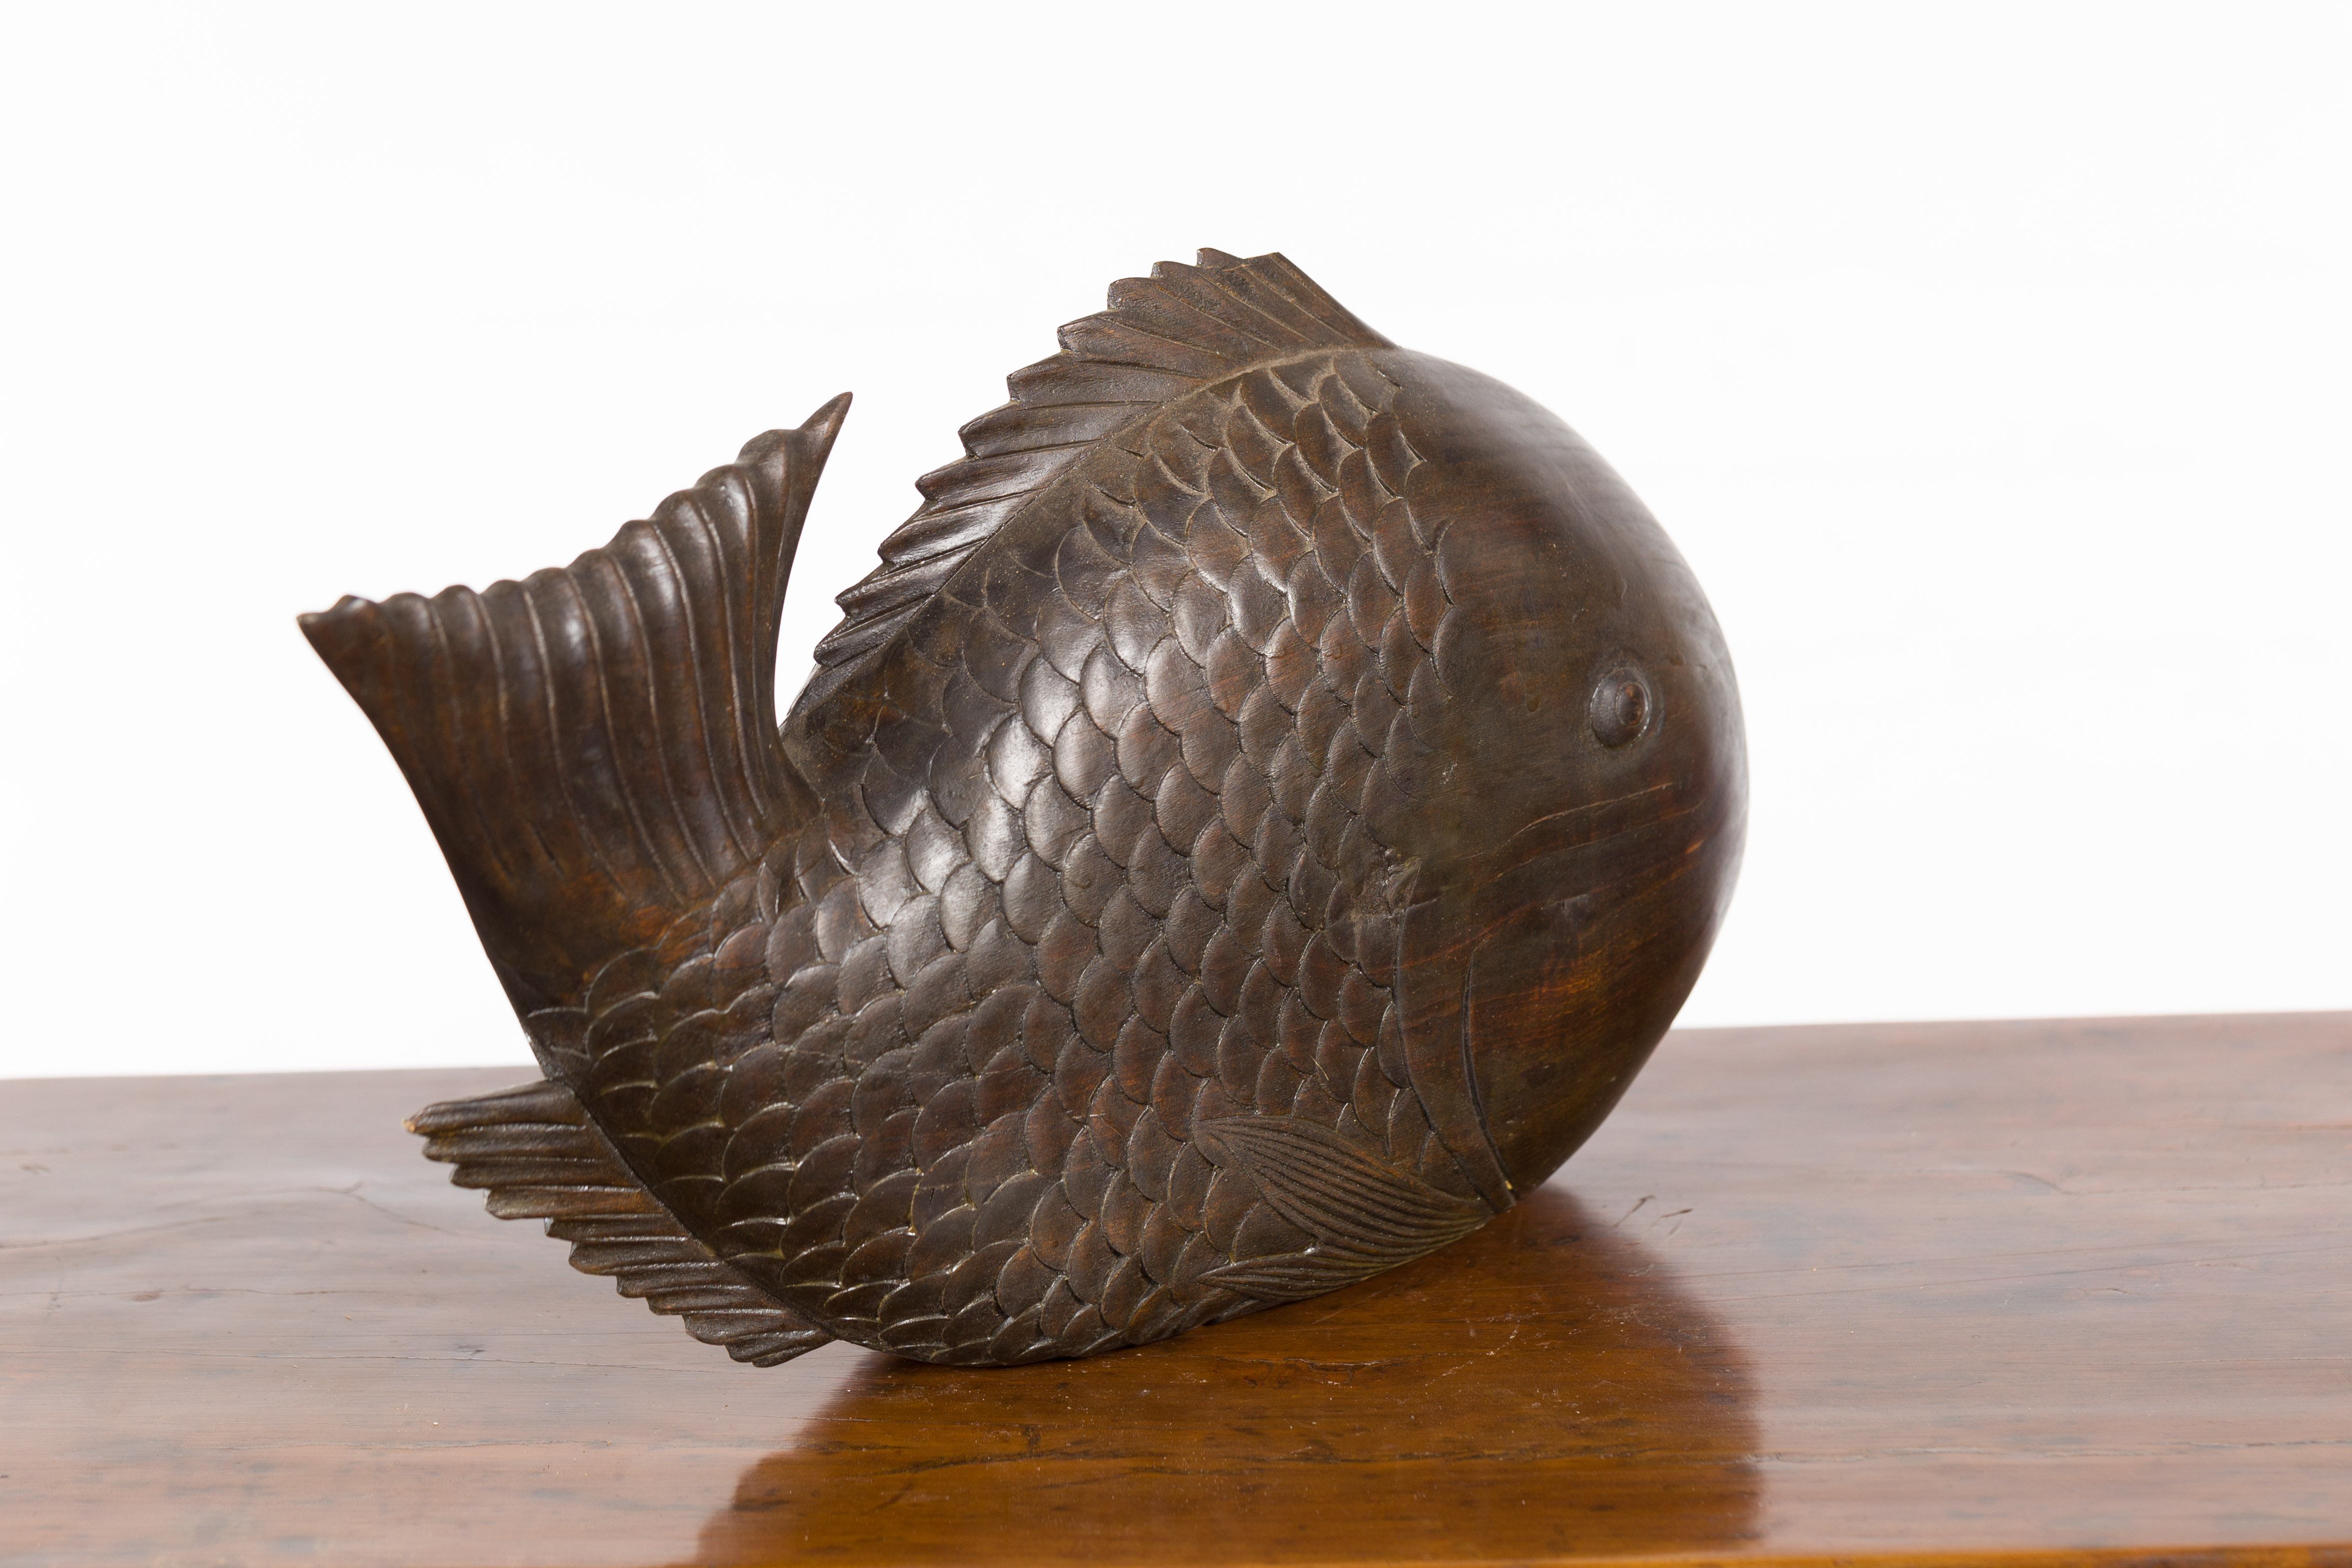 Vintage Thai Carved Wooden Carp Sculpture with Detailed Scales and Dark Patina 4